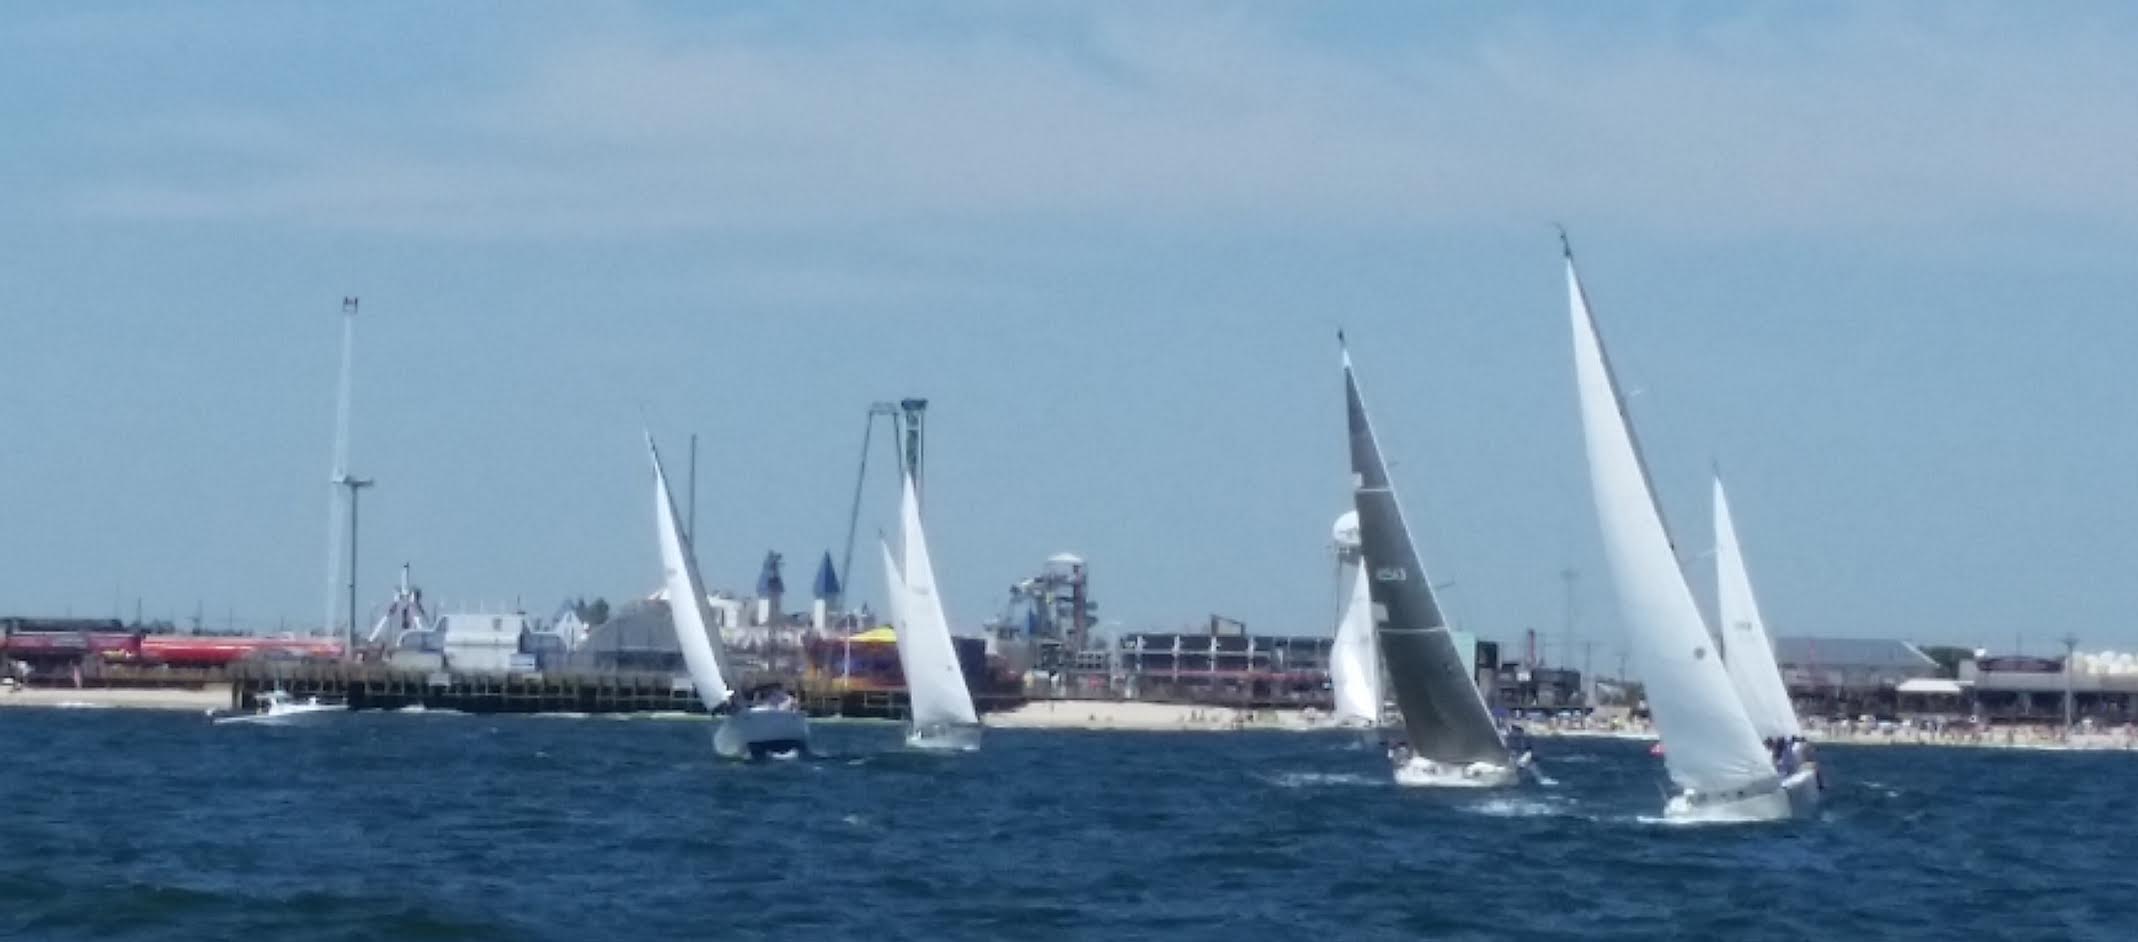  Sailboats racing in the third annual JetStar Regatta rounding the mark located near the final resting spot of the JetStar roller coaster off Seaside Heights and heading back up the beach to the finish at the Manasquan Inlet. (Image courtesy of Mark Connell) 